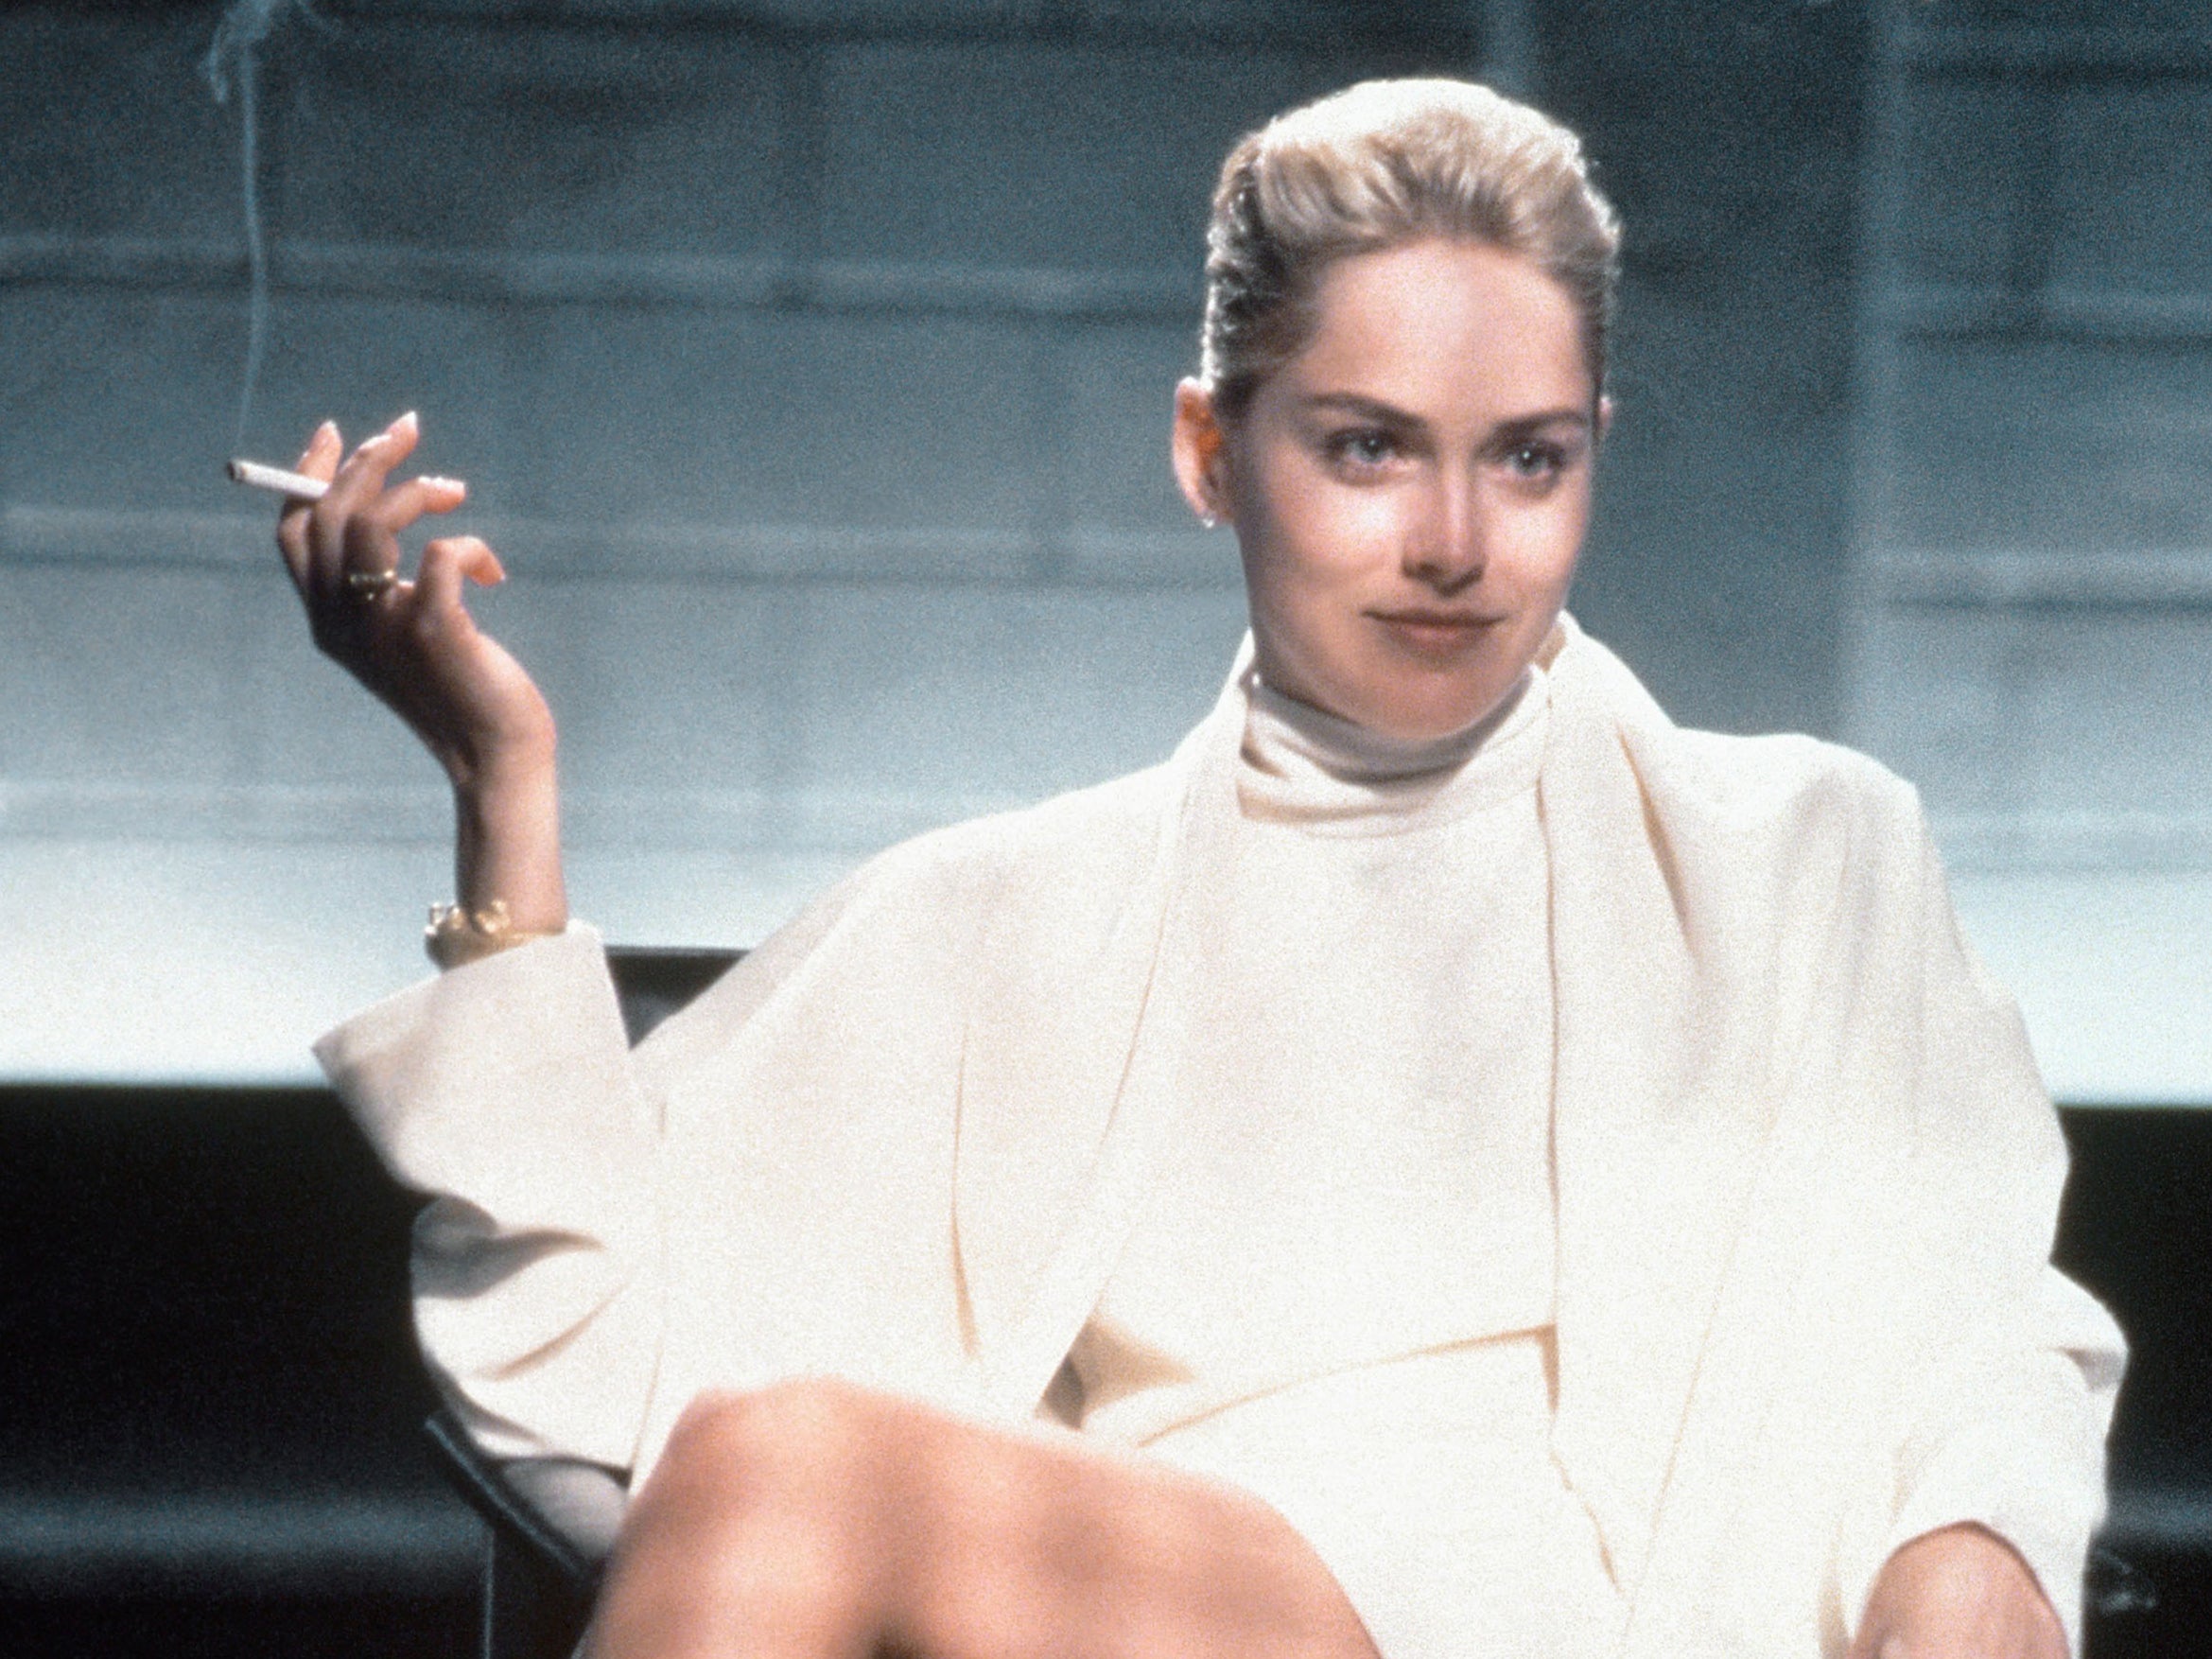 Sharon Stone says she was told to have sex with co-star while filming Basic Instinct The Independent